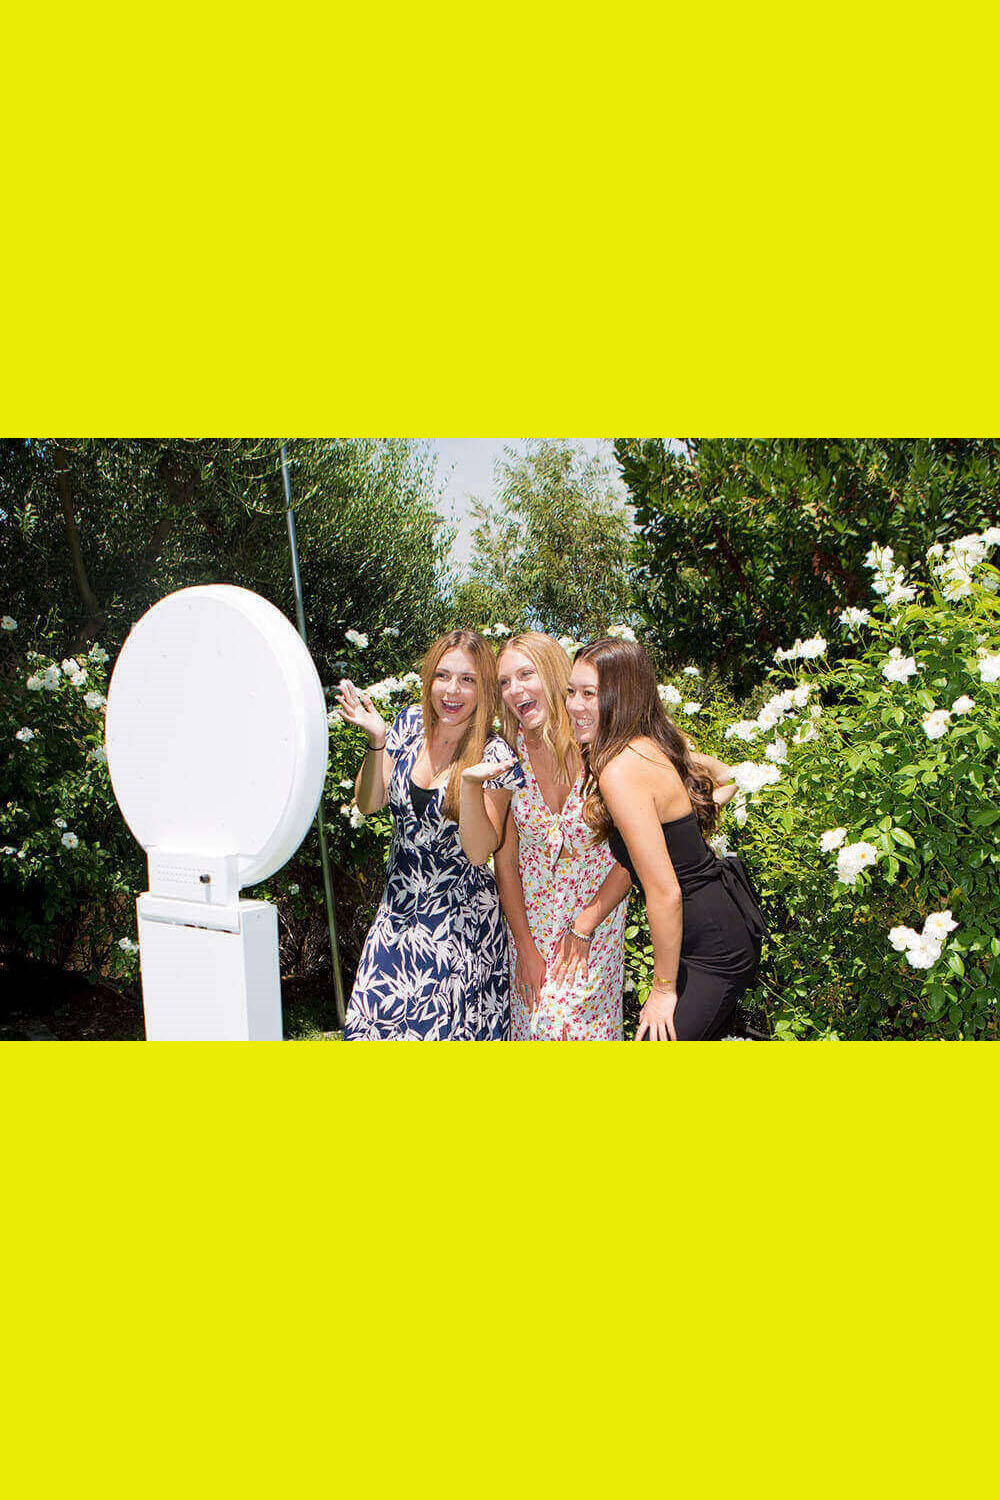 Three girls know how to have fun with this Ventura County selfie station.